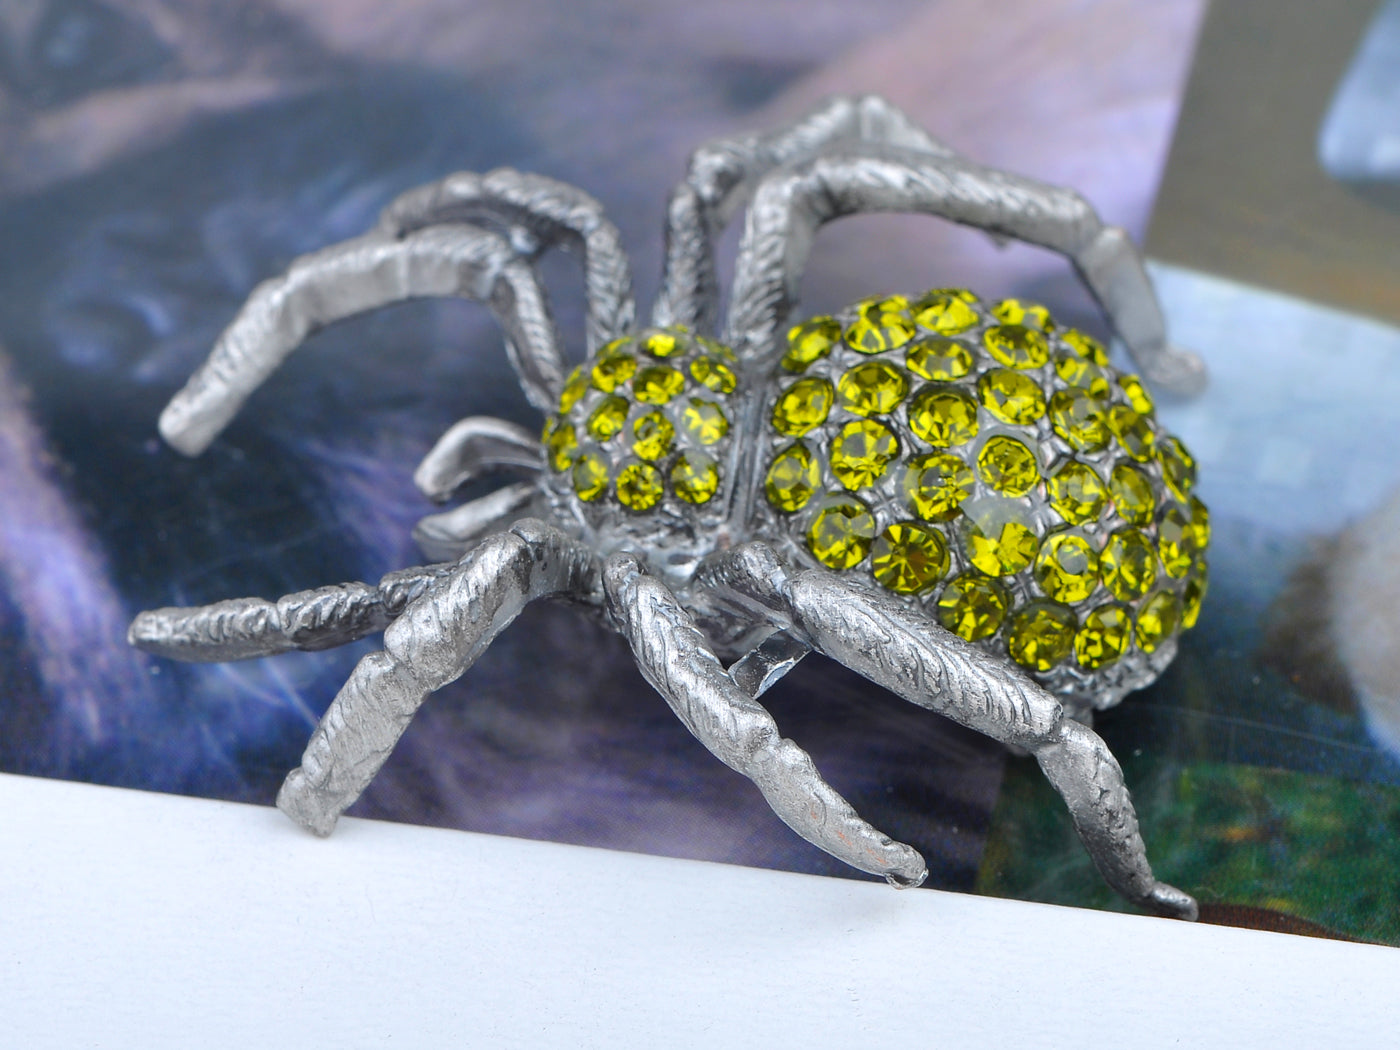 Vintage Repro Peridot Spider Jewelry Pin Brooch